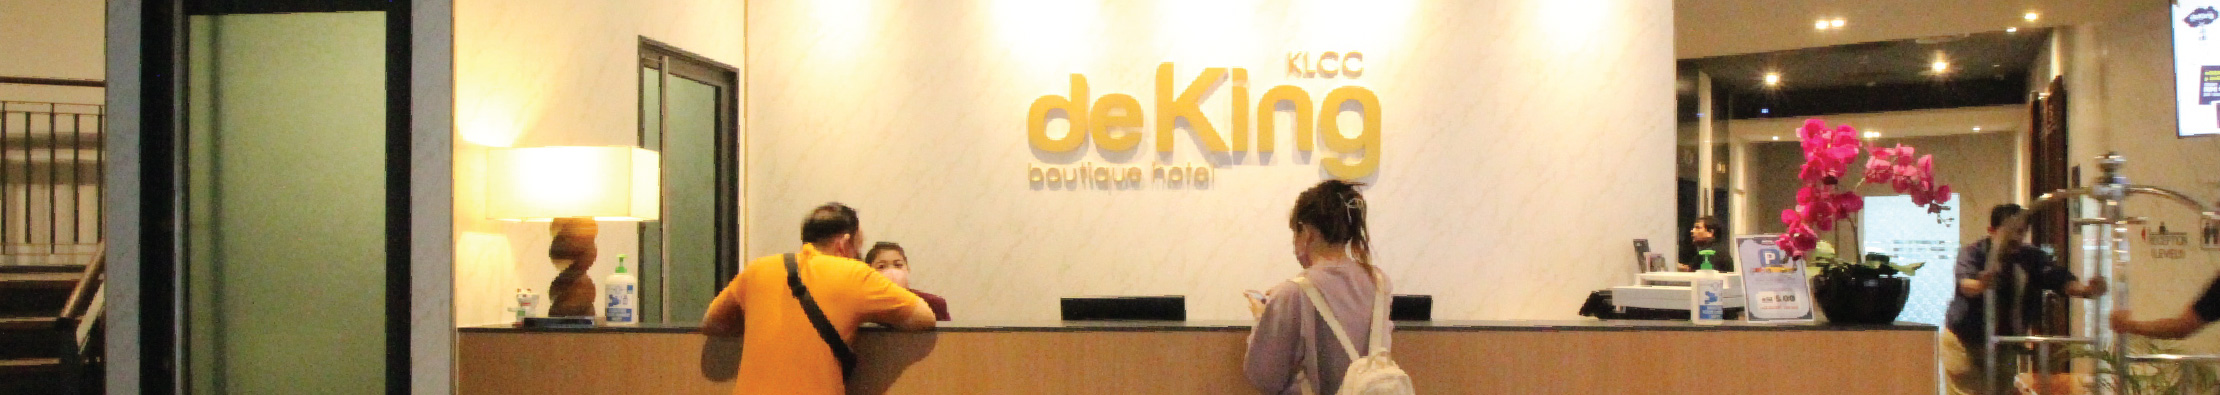 <span>Welcome to de King KLCC</span> Reservation